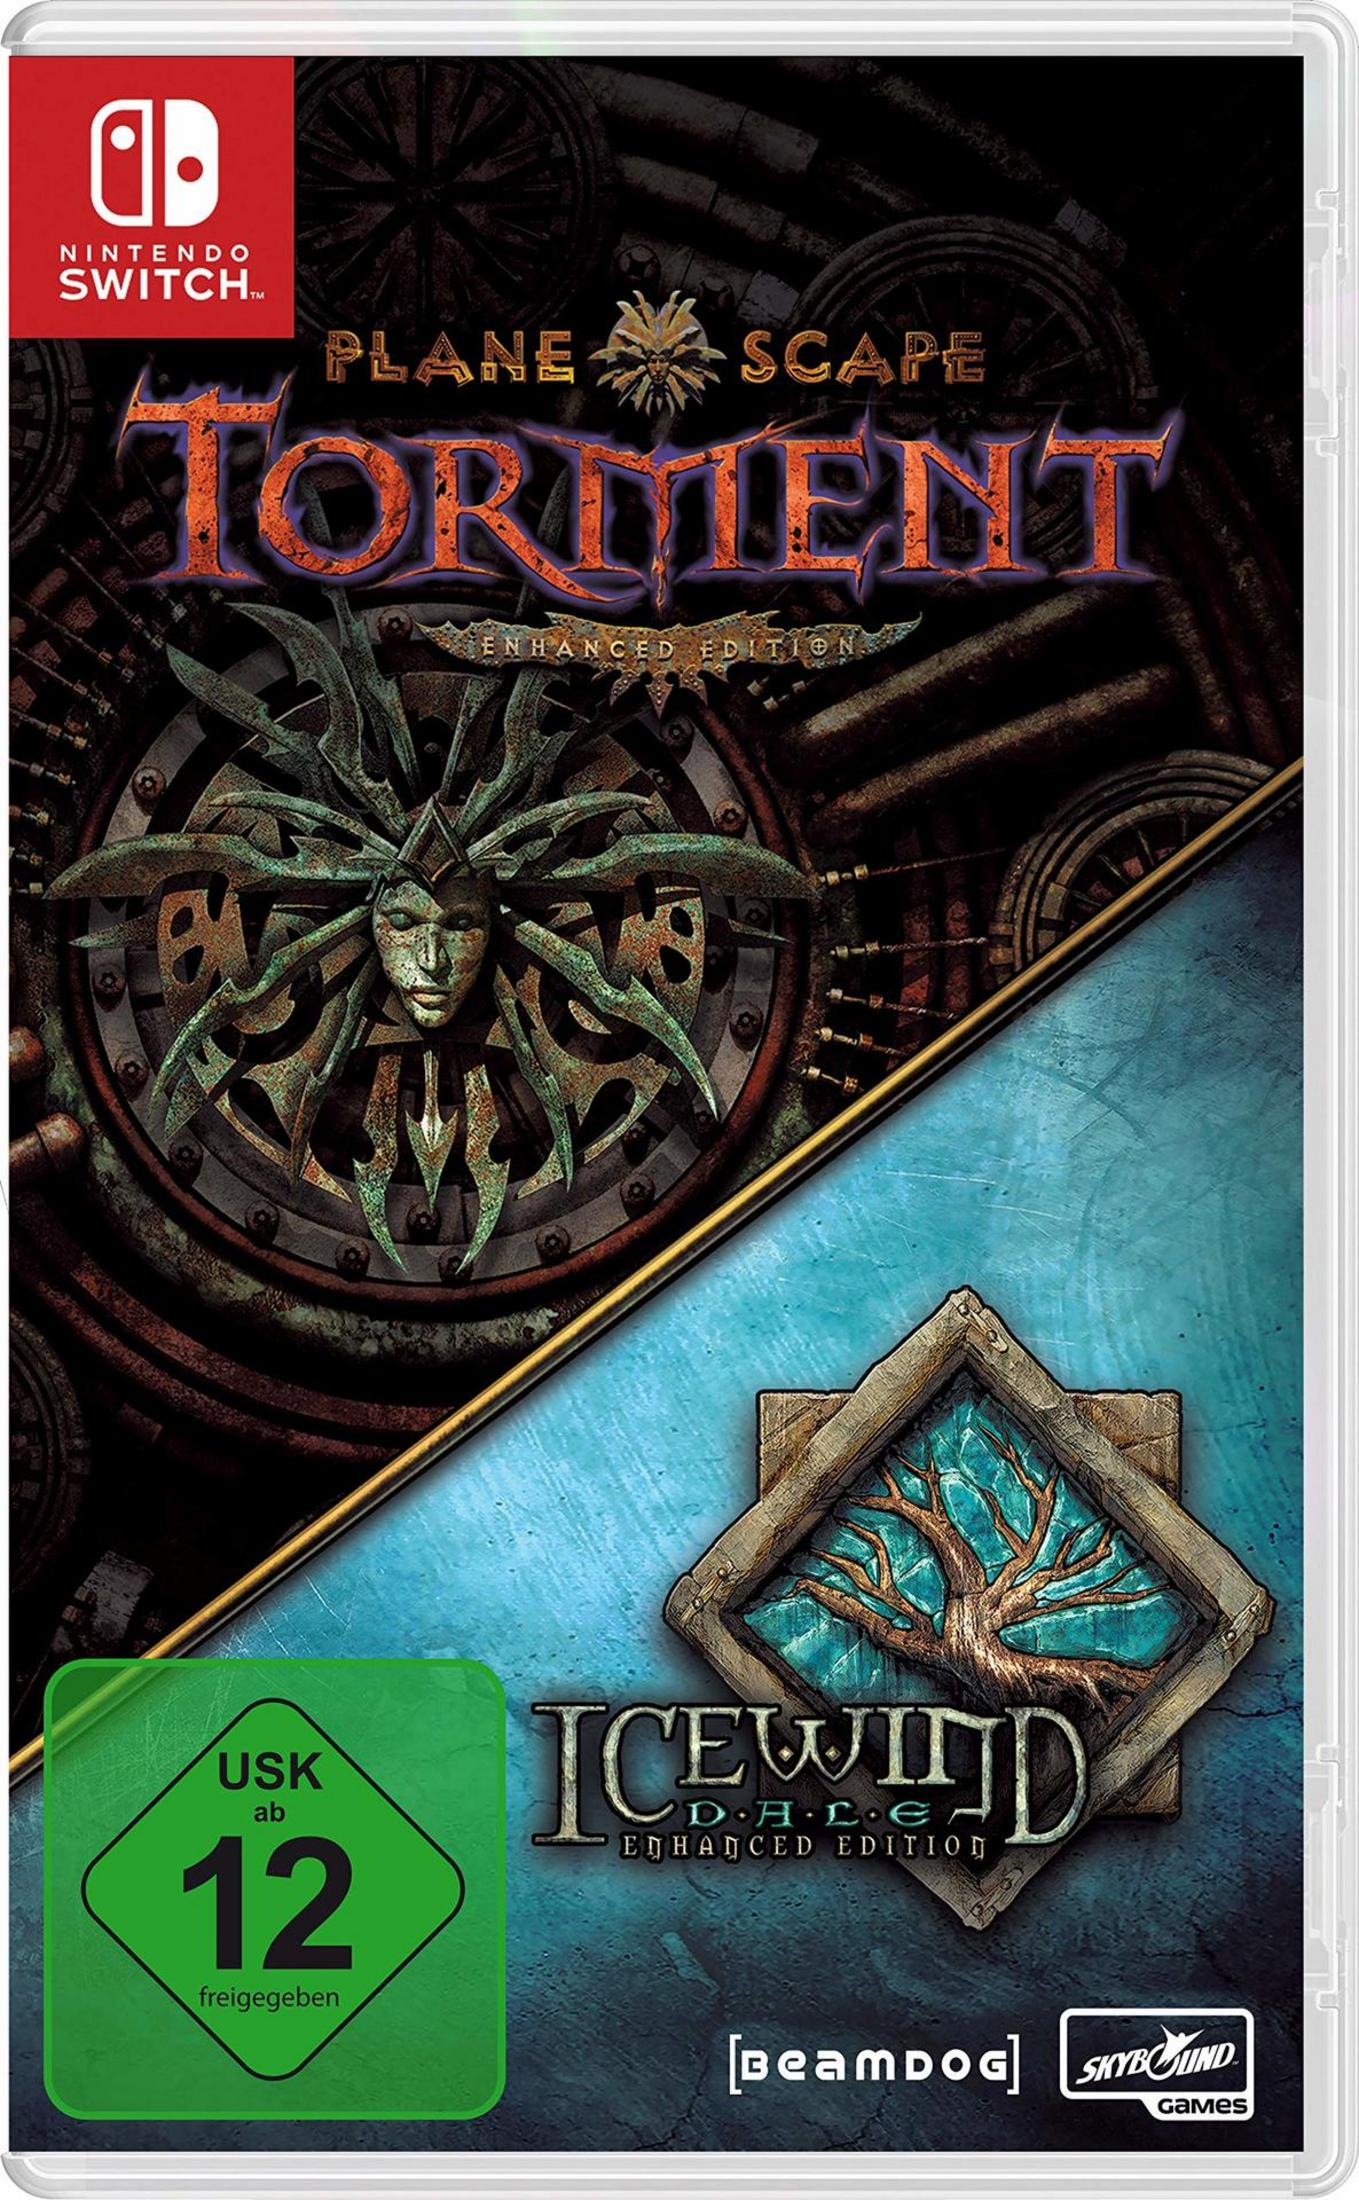 [Nintendo Planescape: Enhanced Edition - & Switch] Torment Icewind Dale